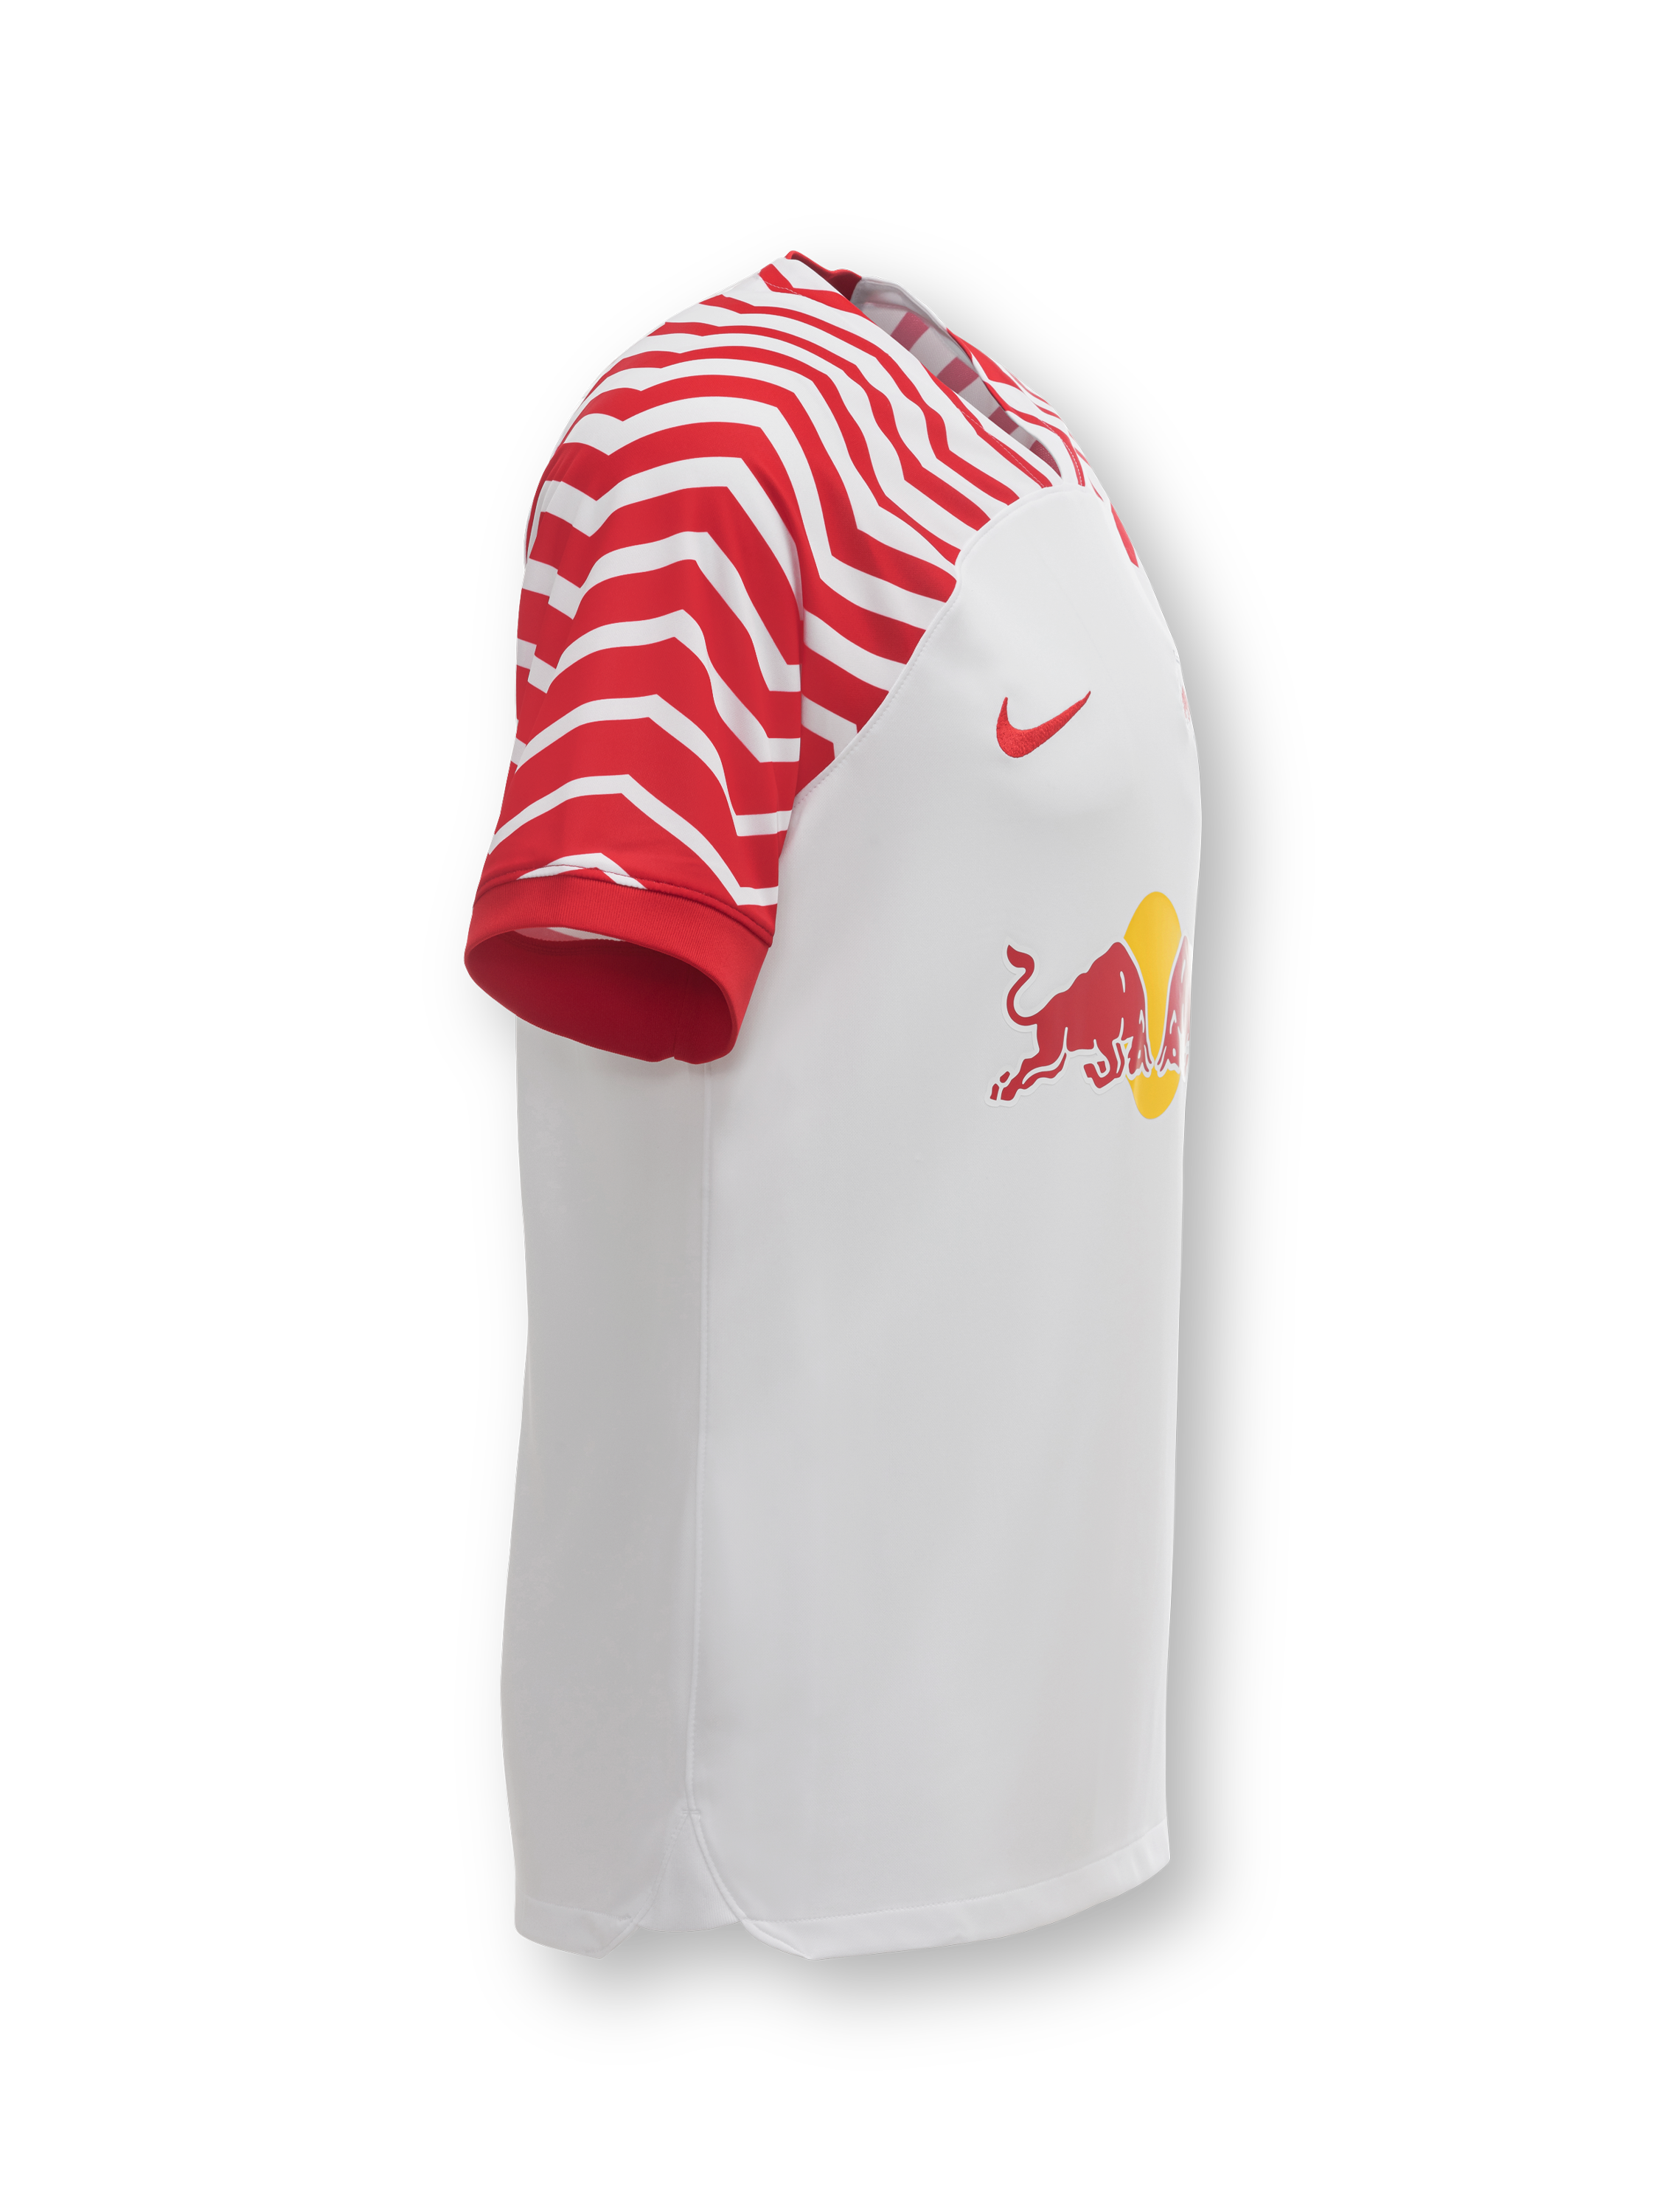 RB Leipzig Launch 23/24 Home Shirt From Nike - SoccerBible